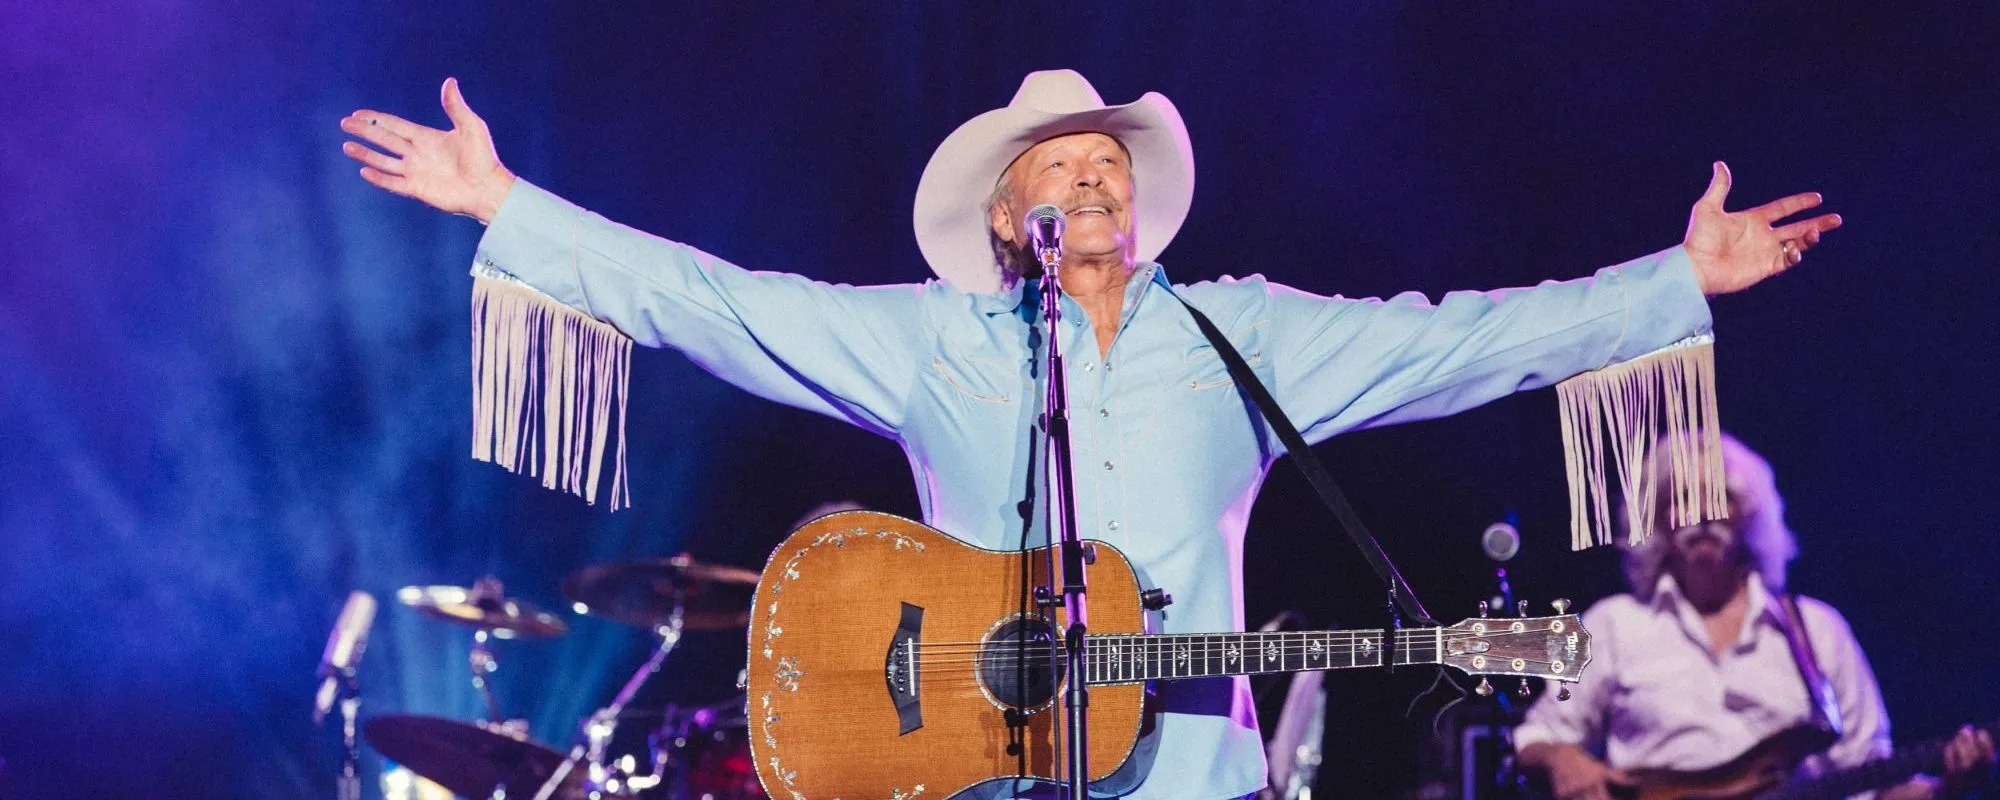 Alan Jackson Shares Personal Egg Nog Recipe Just in Time for the Holidays